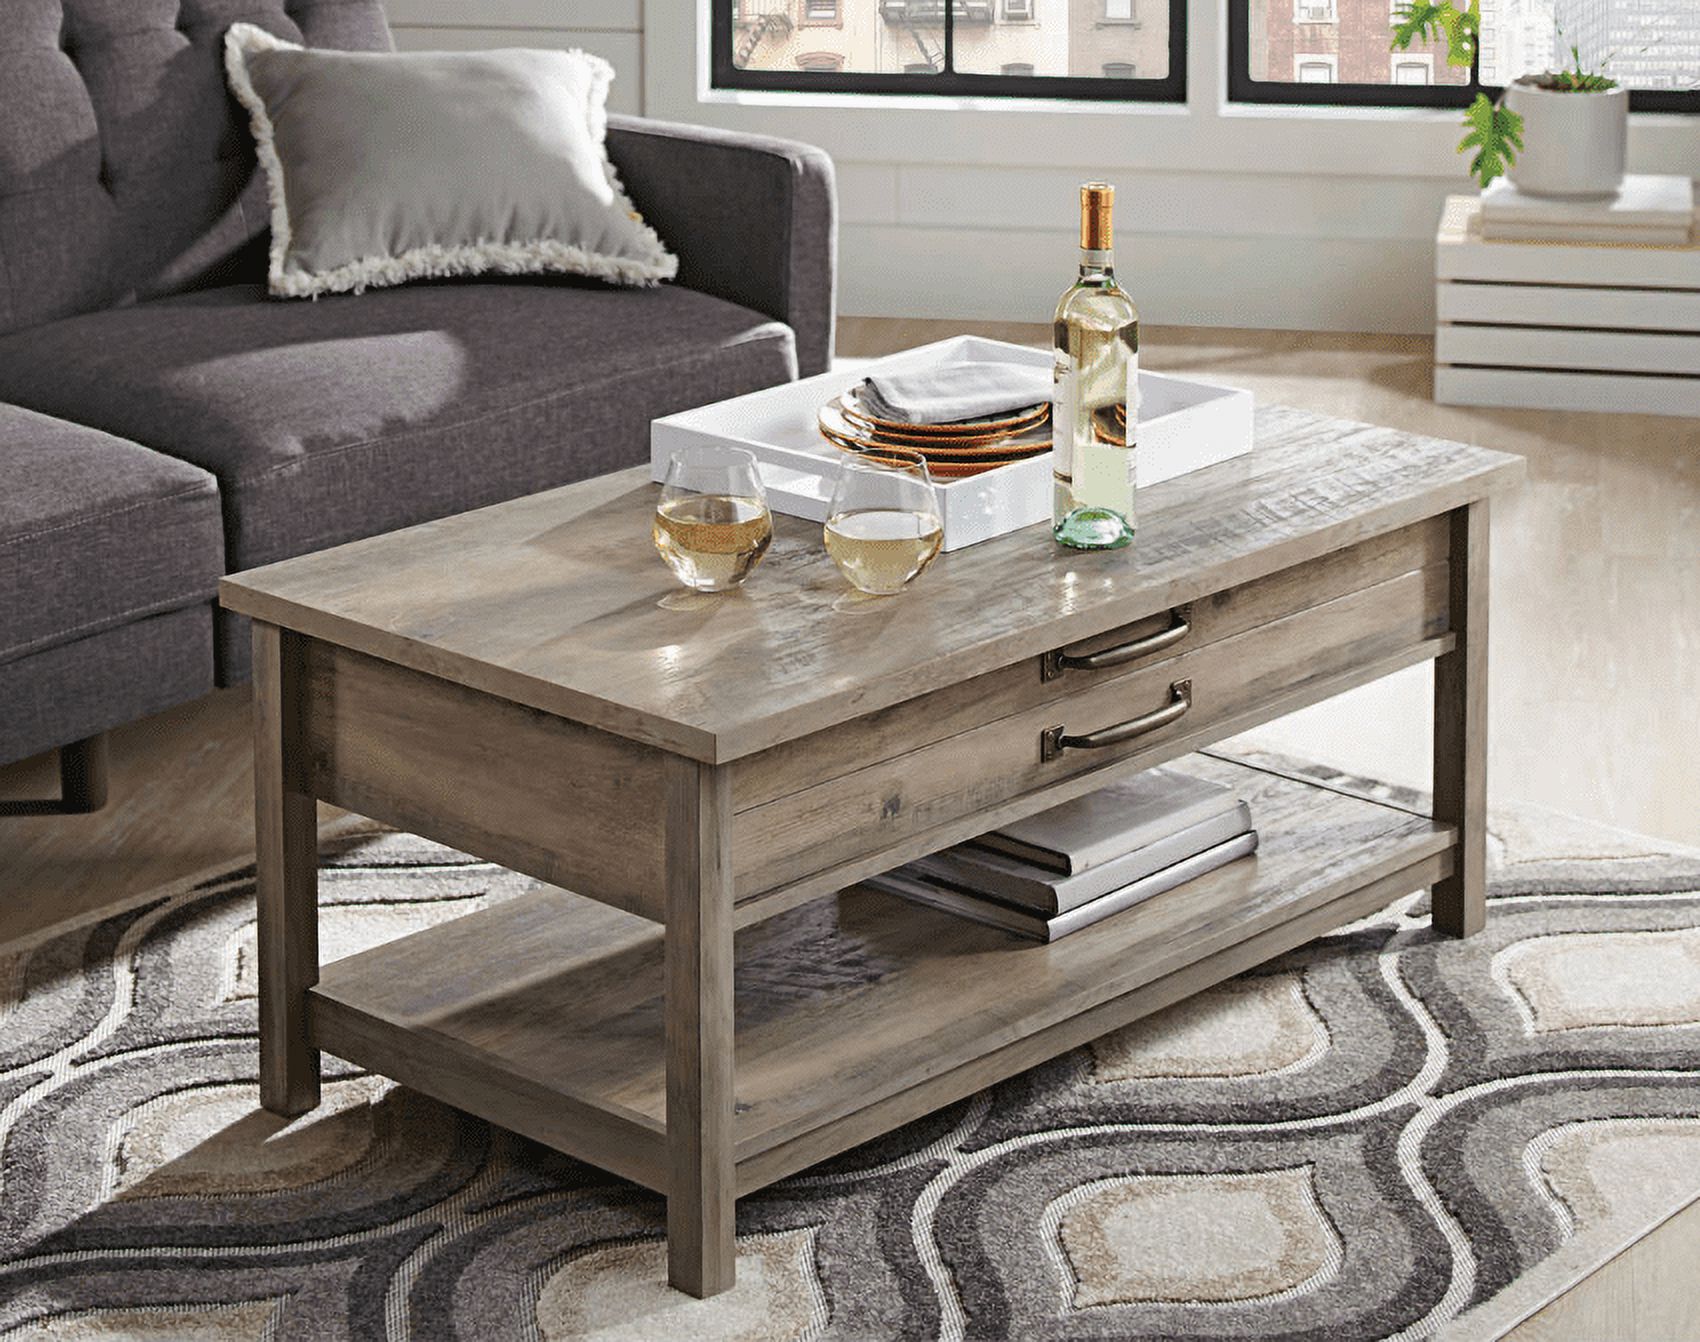 Better Homes & Gardens Modern Farmhouse Rectangle Lift-Top Coffee Table, Rustic Gray Finish - image 1 of 13